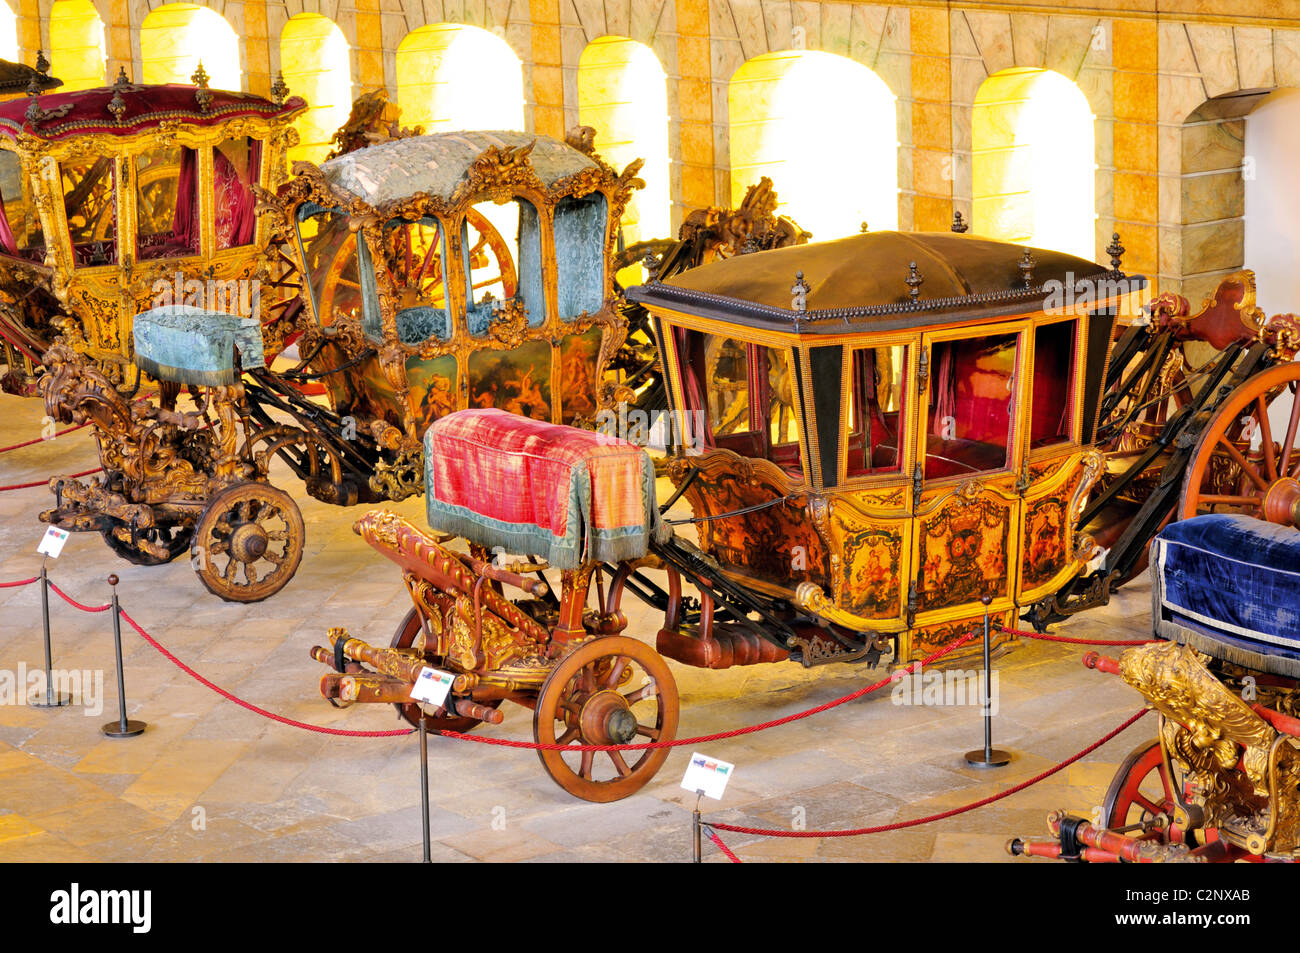 Portugal, Lissabon: Museu Dos Coches in Belem Stockfoto